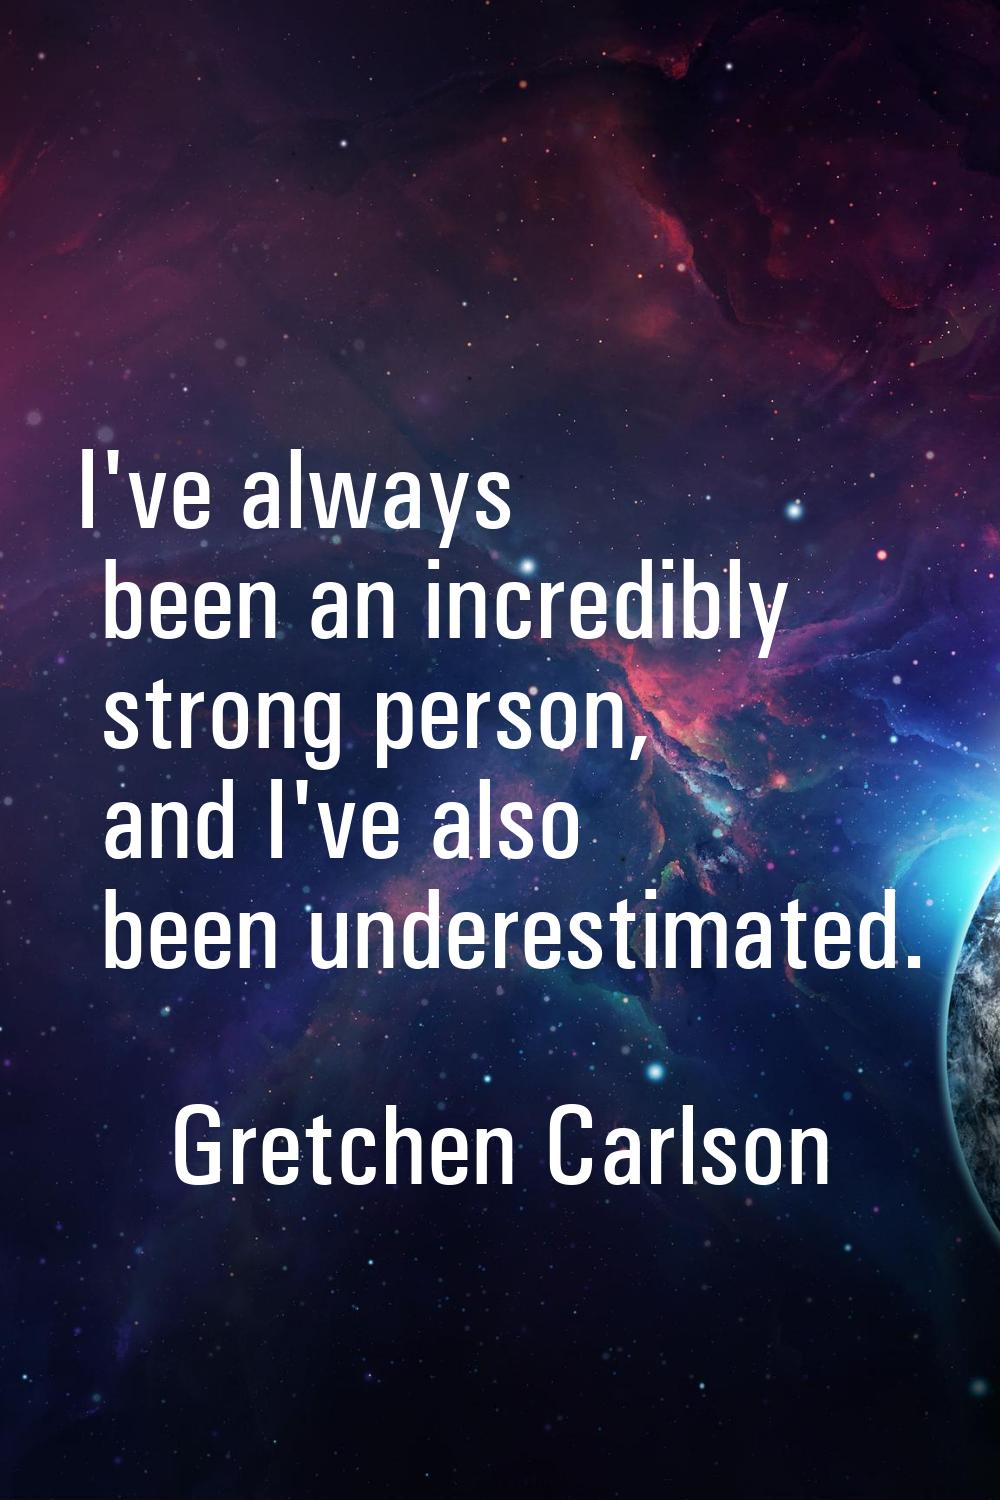 I've always been an incredibly strong person, and I've also been underestimated.